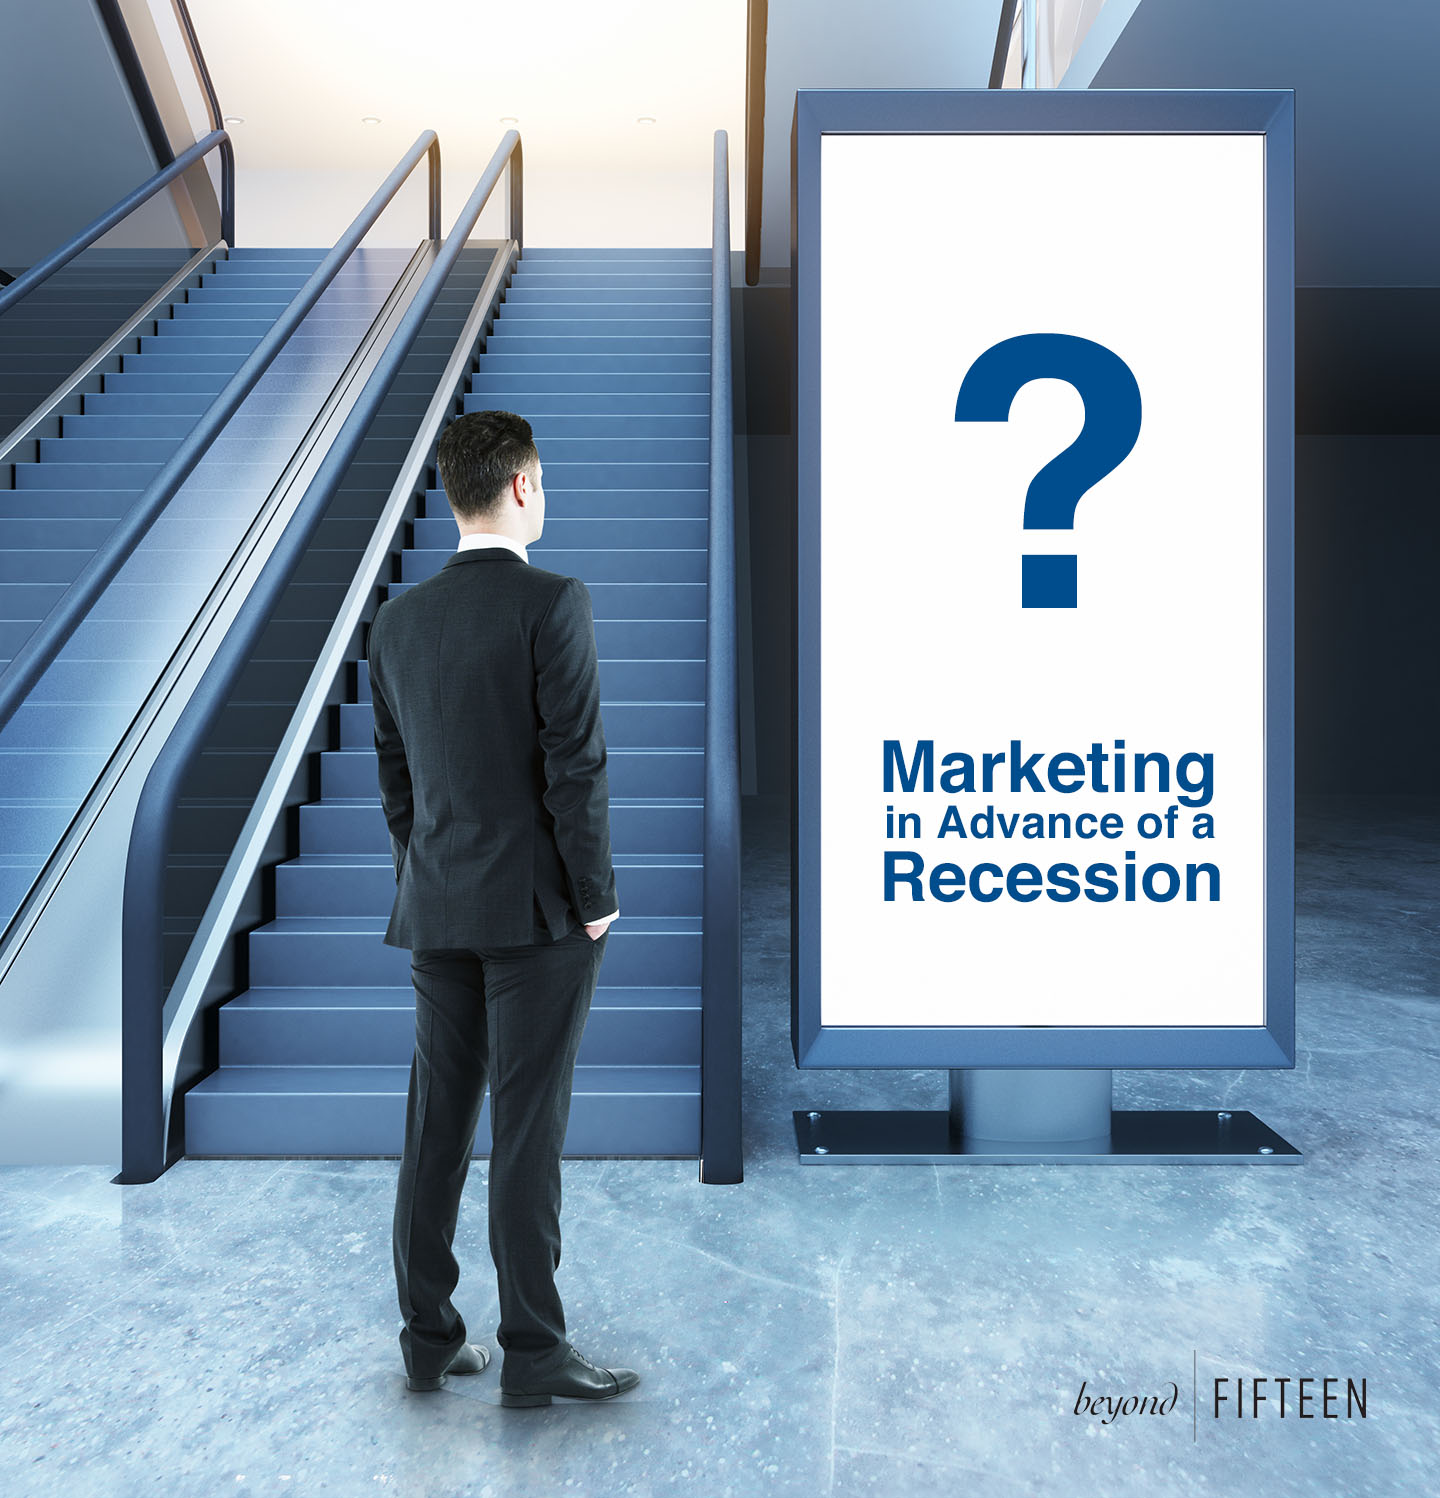 Marketing in Advance of a Recession